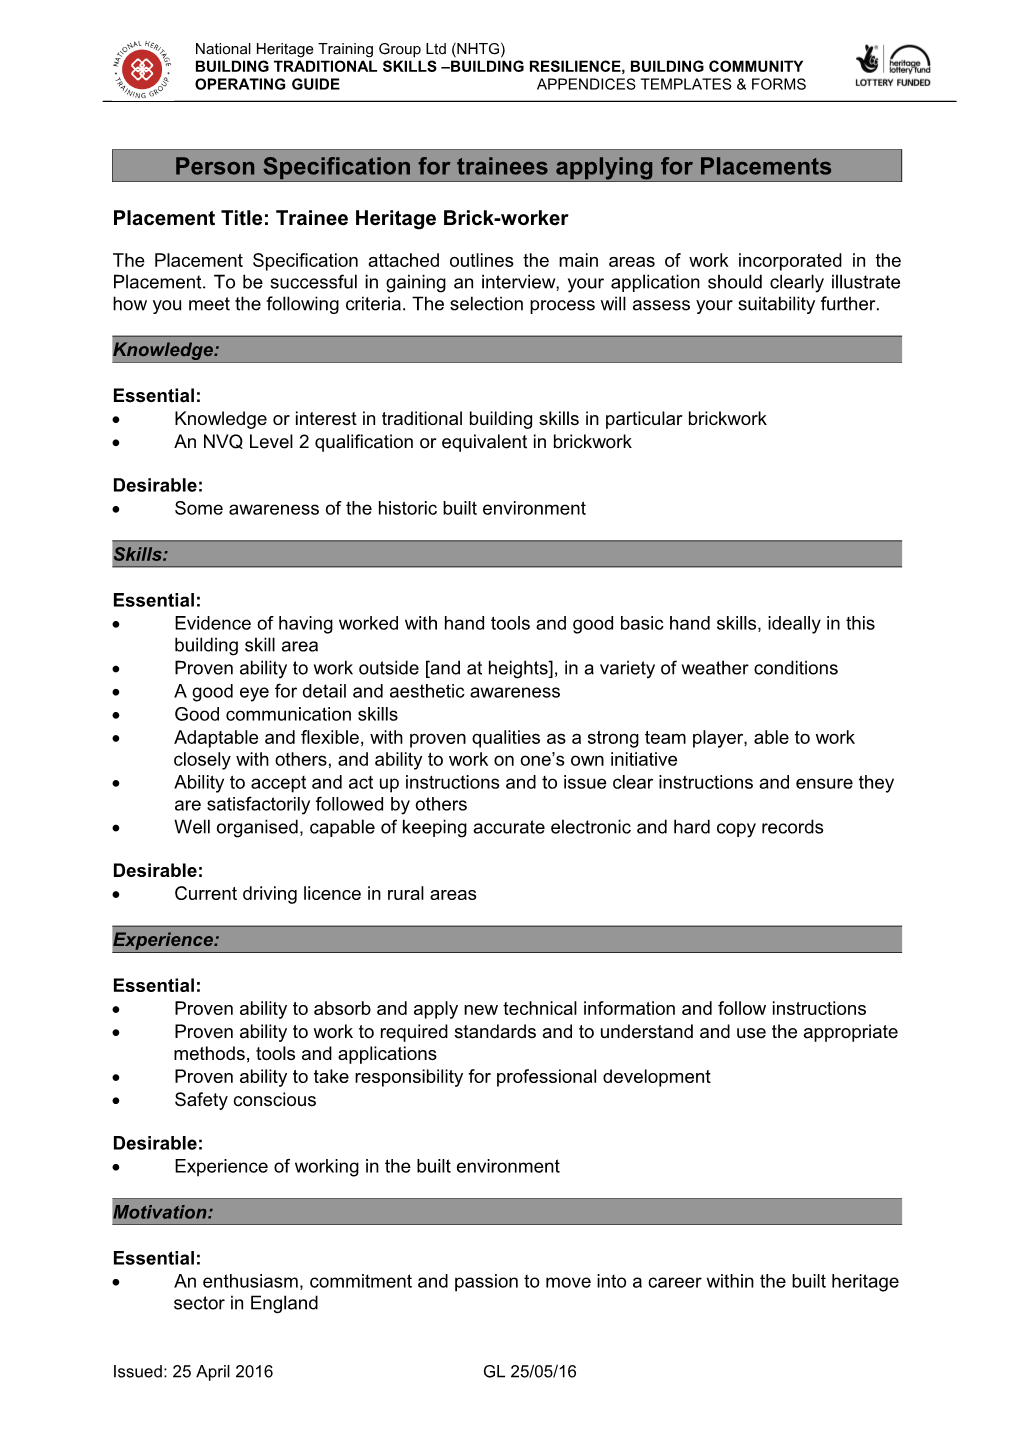 Person Specification for Trainees Applying for Placements